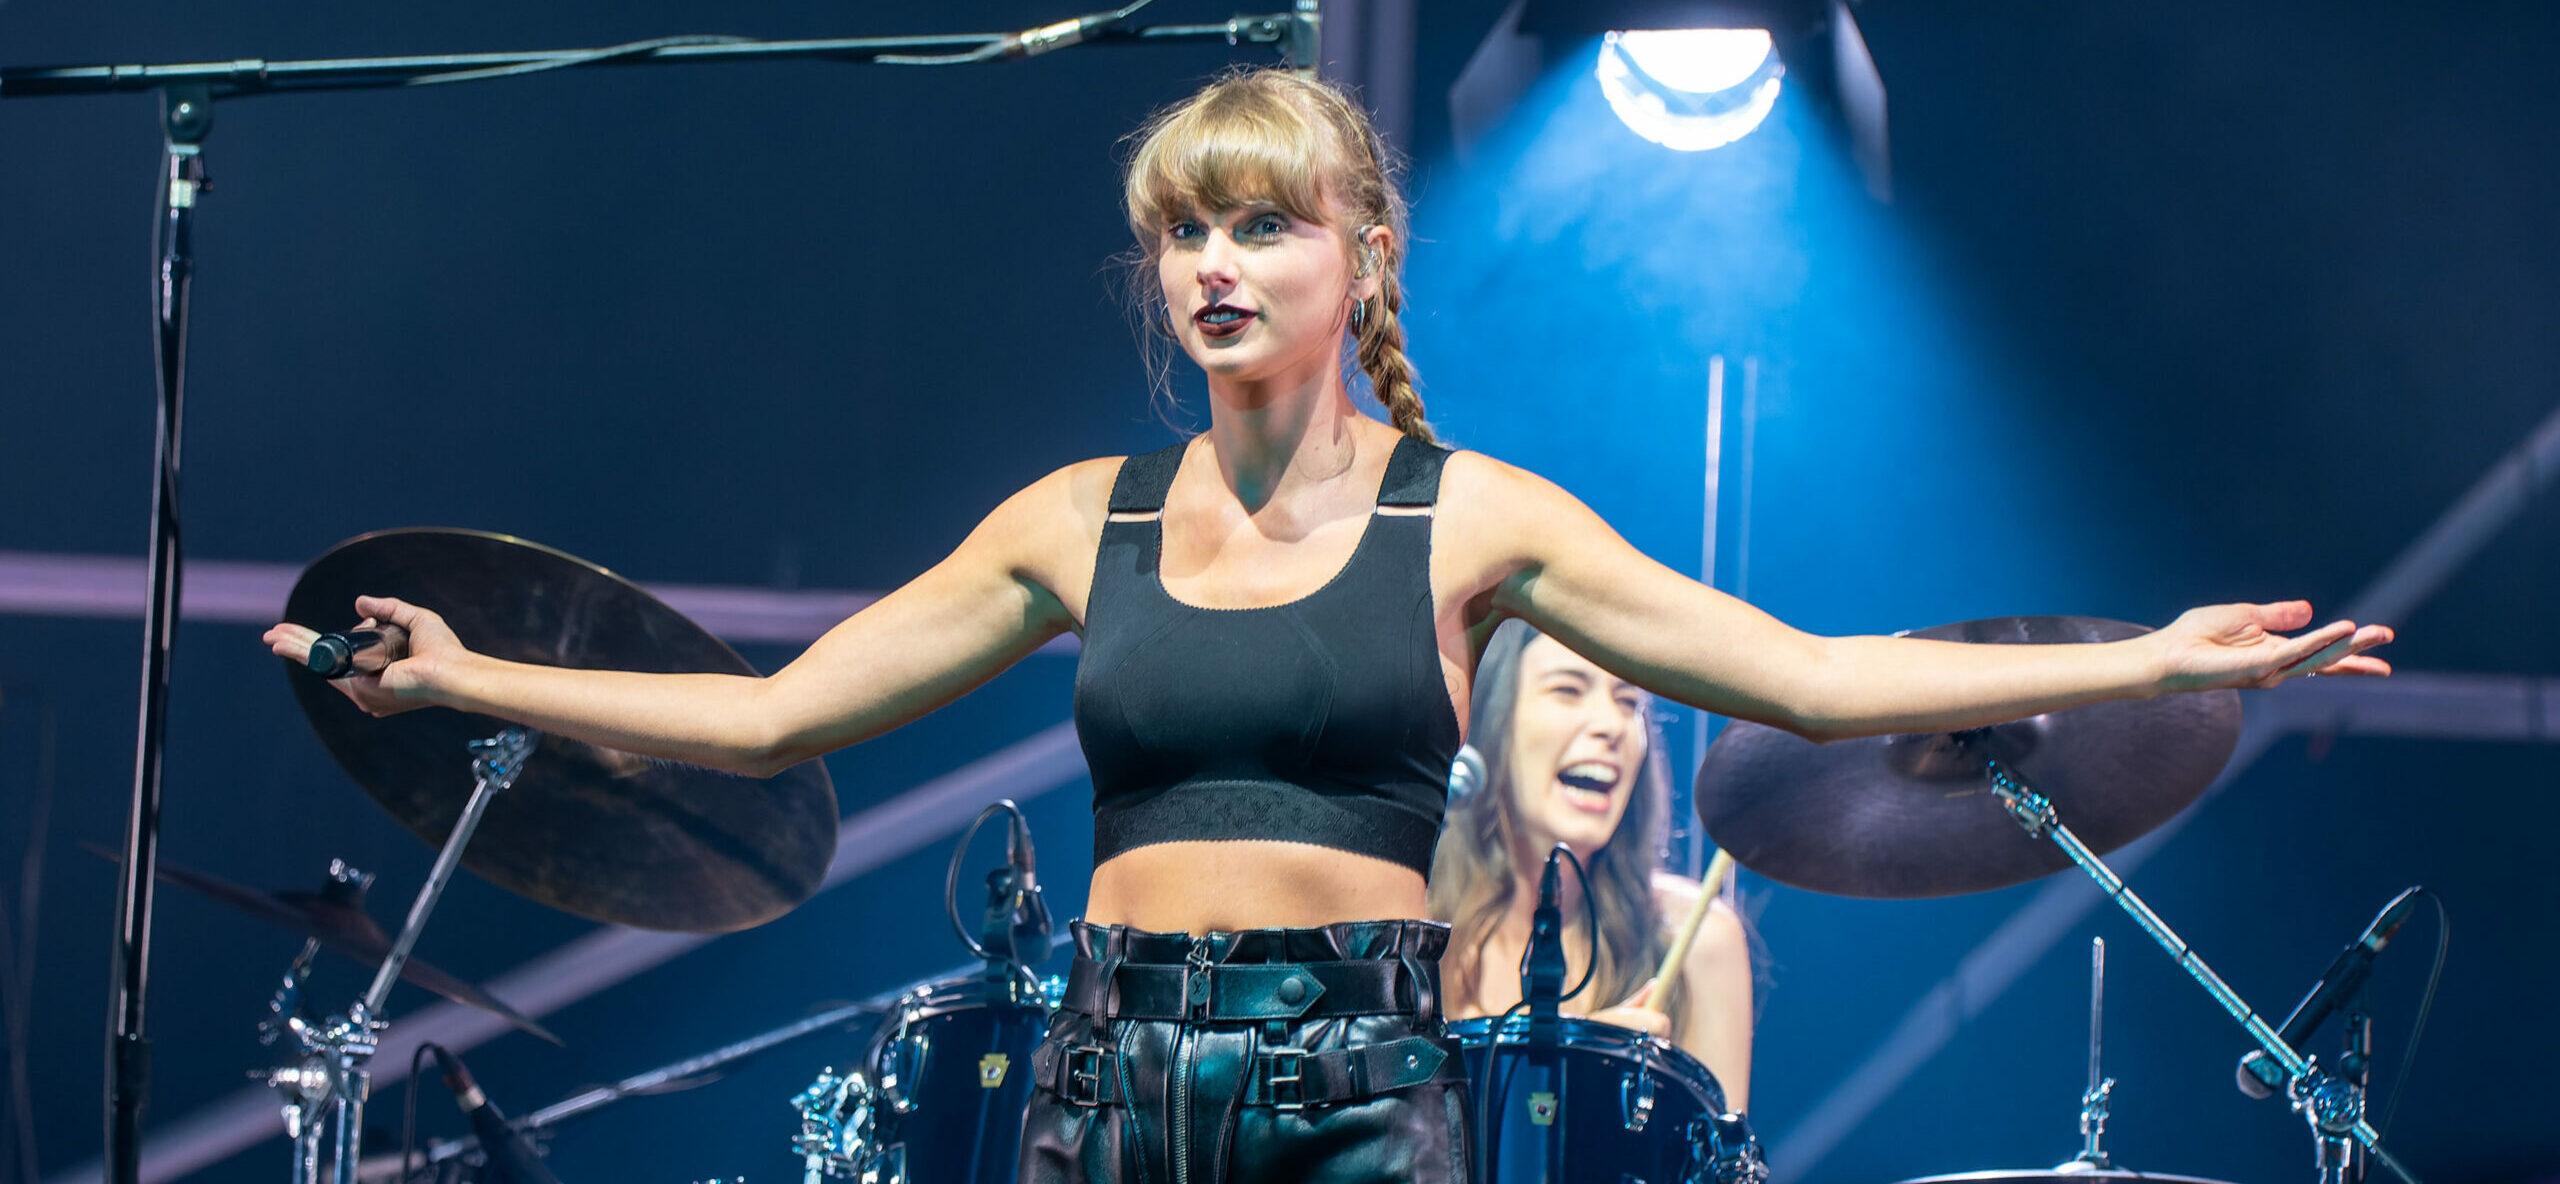 Taylor Swift makes a surprise guest appearance during Haims show at the O2 Arena